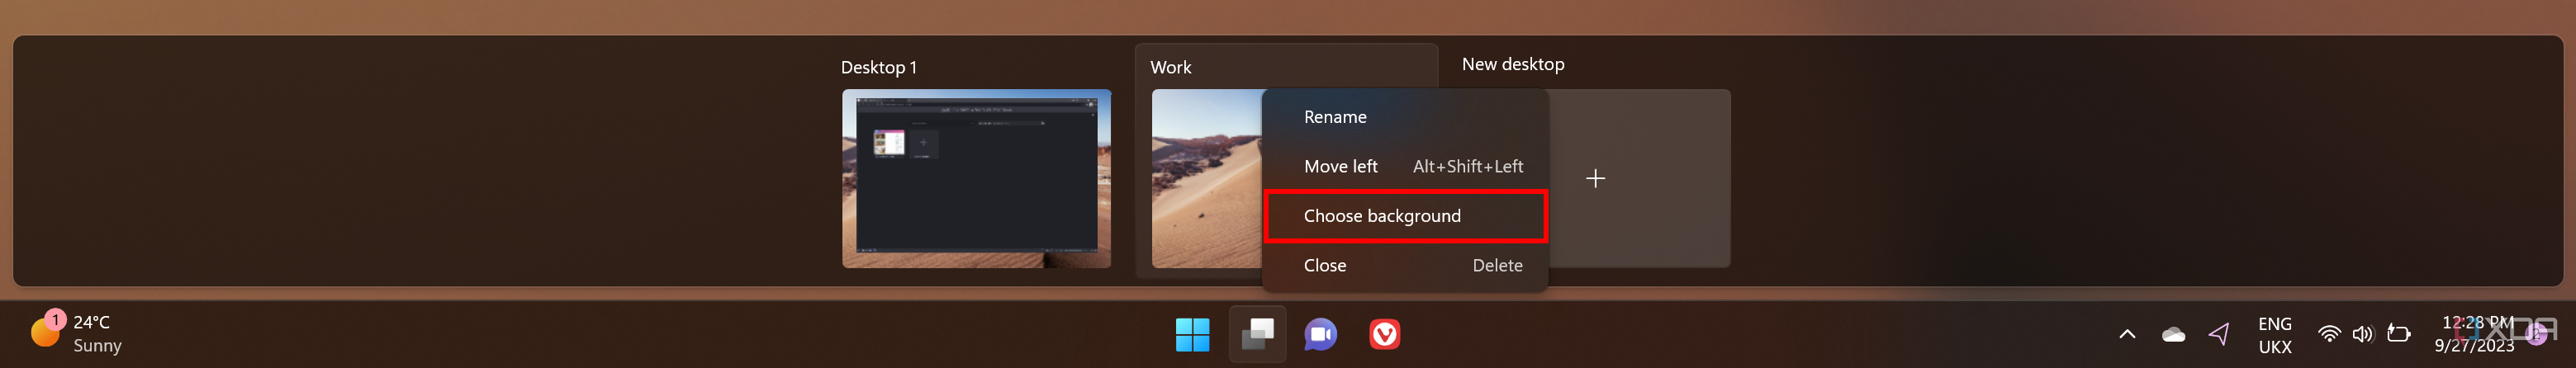 Screenshot of virtual desktops in Windows 11 showing the context menu with the Choose background button highlighted